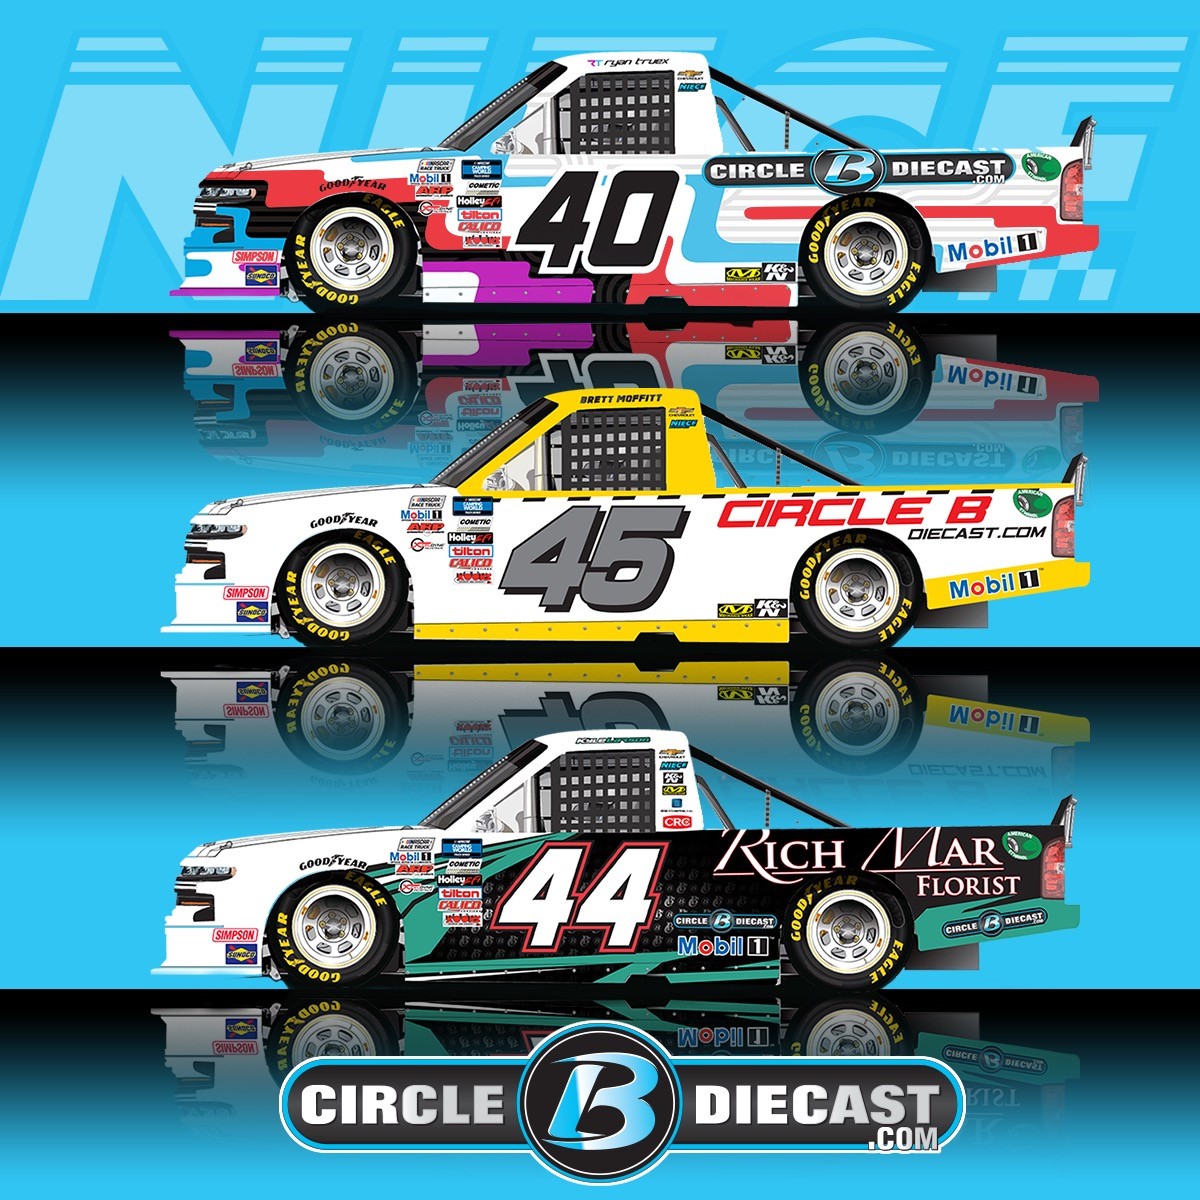 CircleBDiecast.com and Niece Motorsports Team up for the Pinty’s Truck Race on Dirt